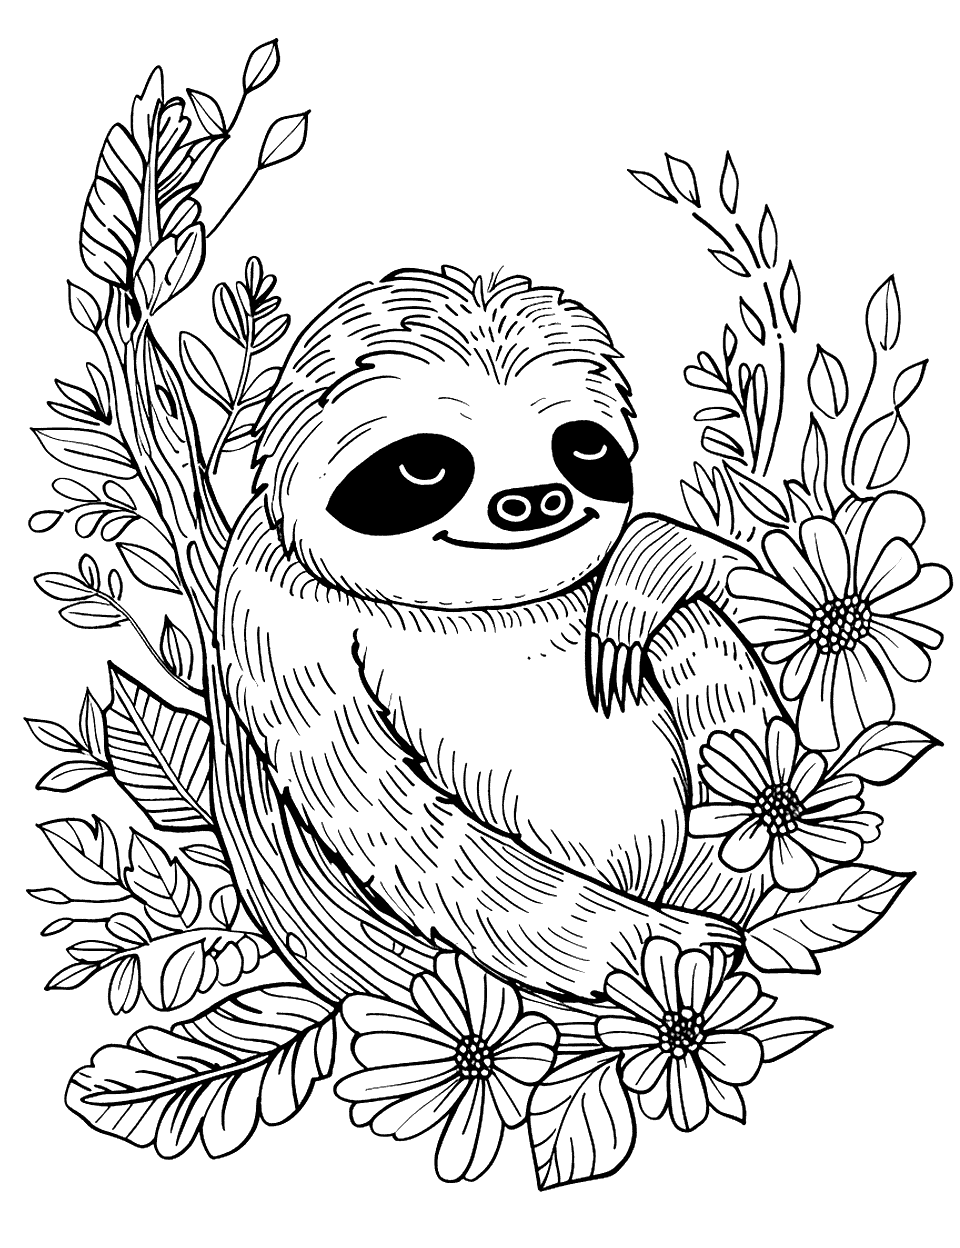 Sloth in a Simple Floral Setting Coloring Page - A sloth sitting among flowers, with a focus on the sloth and minimal floral details.